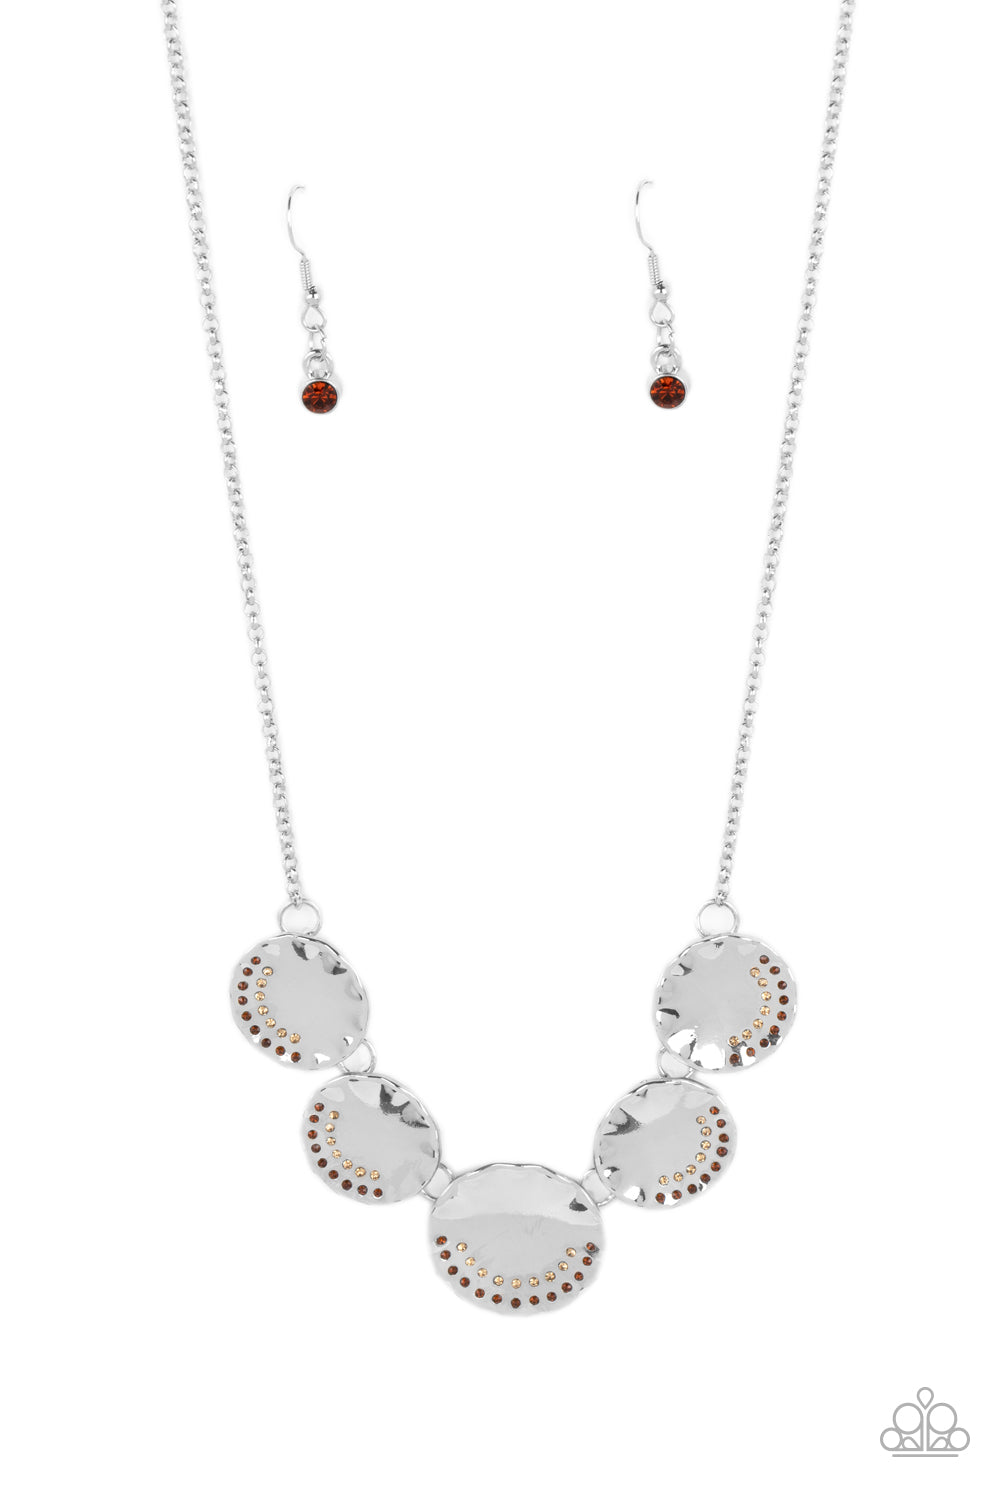 Swanky Shimmer - Brown Dainty Rhinestones/Scalloped Silver Discs Paparazzi Necklace & matching earrings